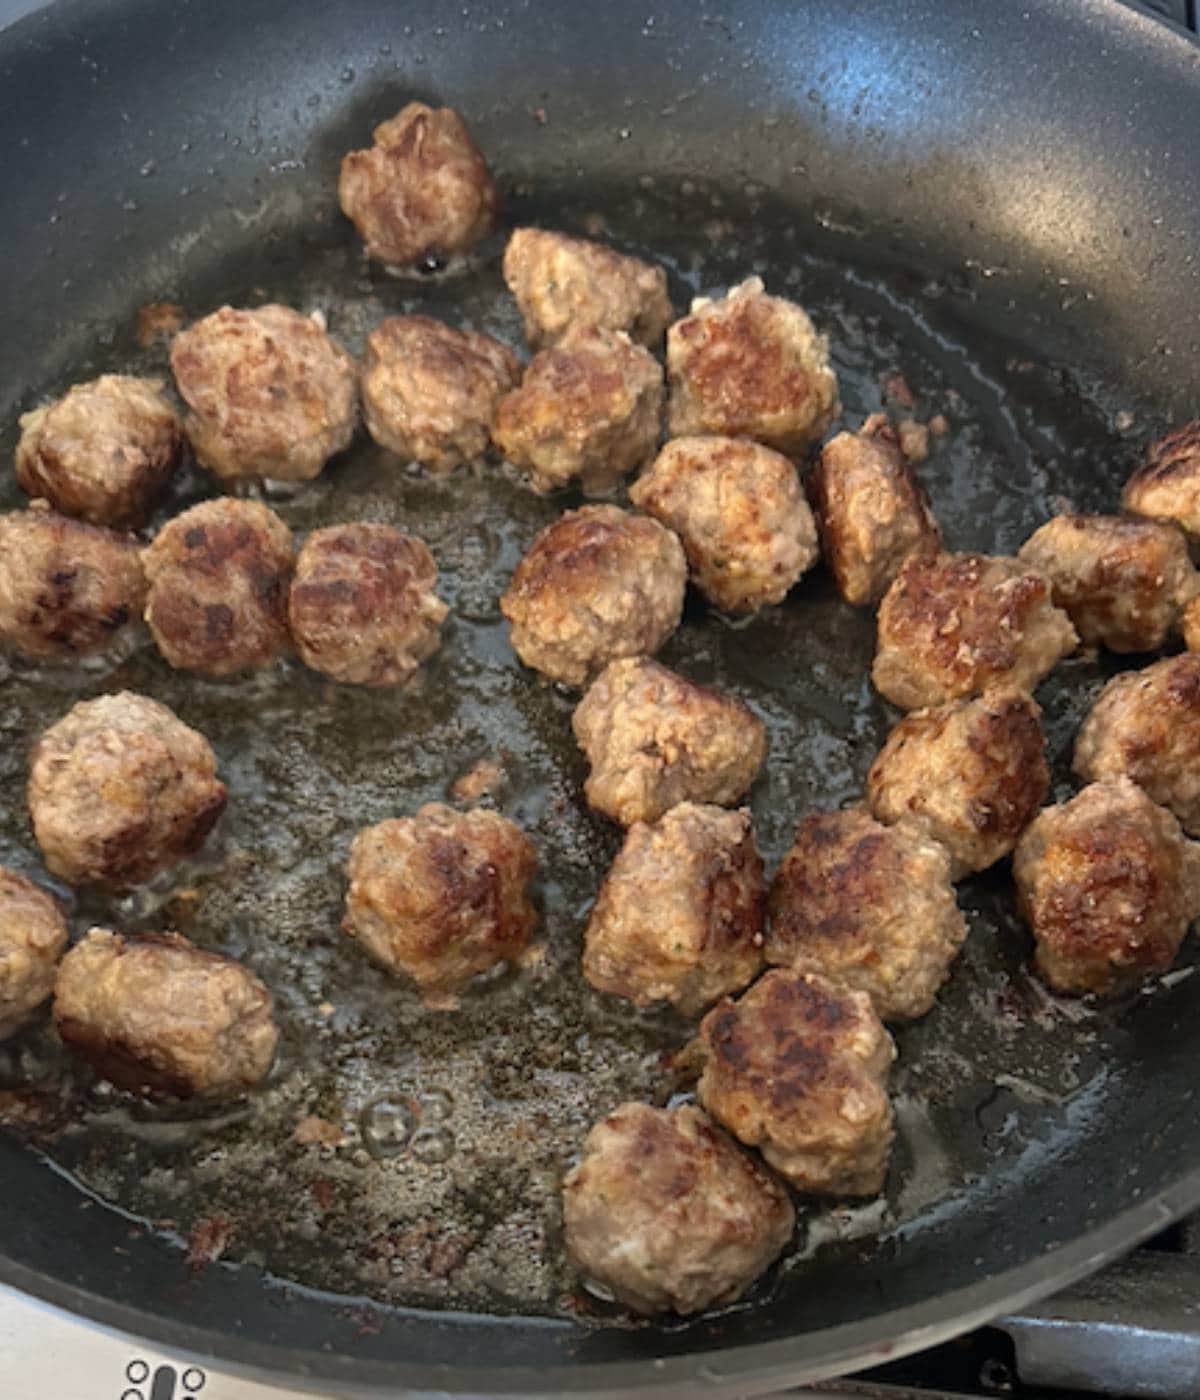 Small meatballs pan frying in skillet.